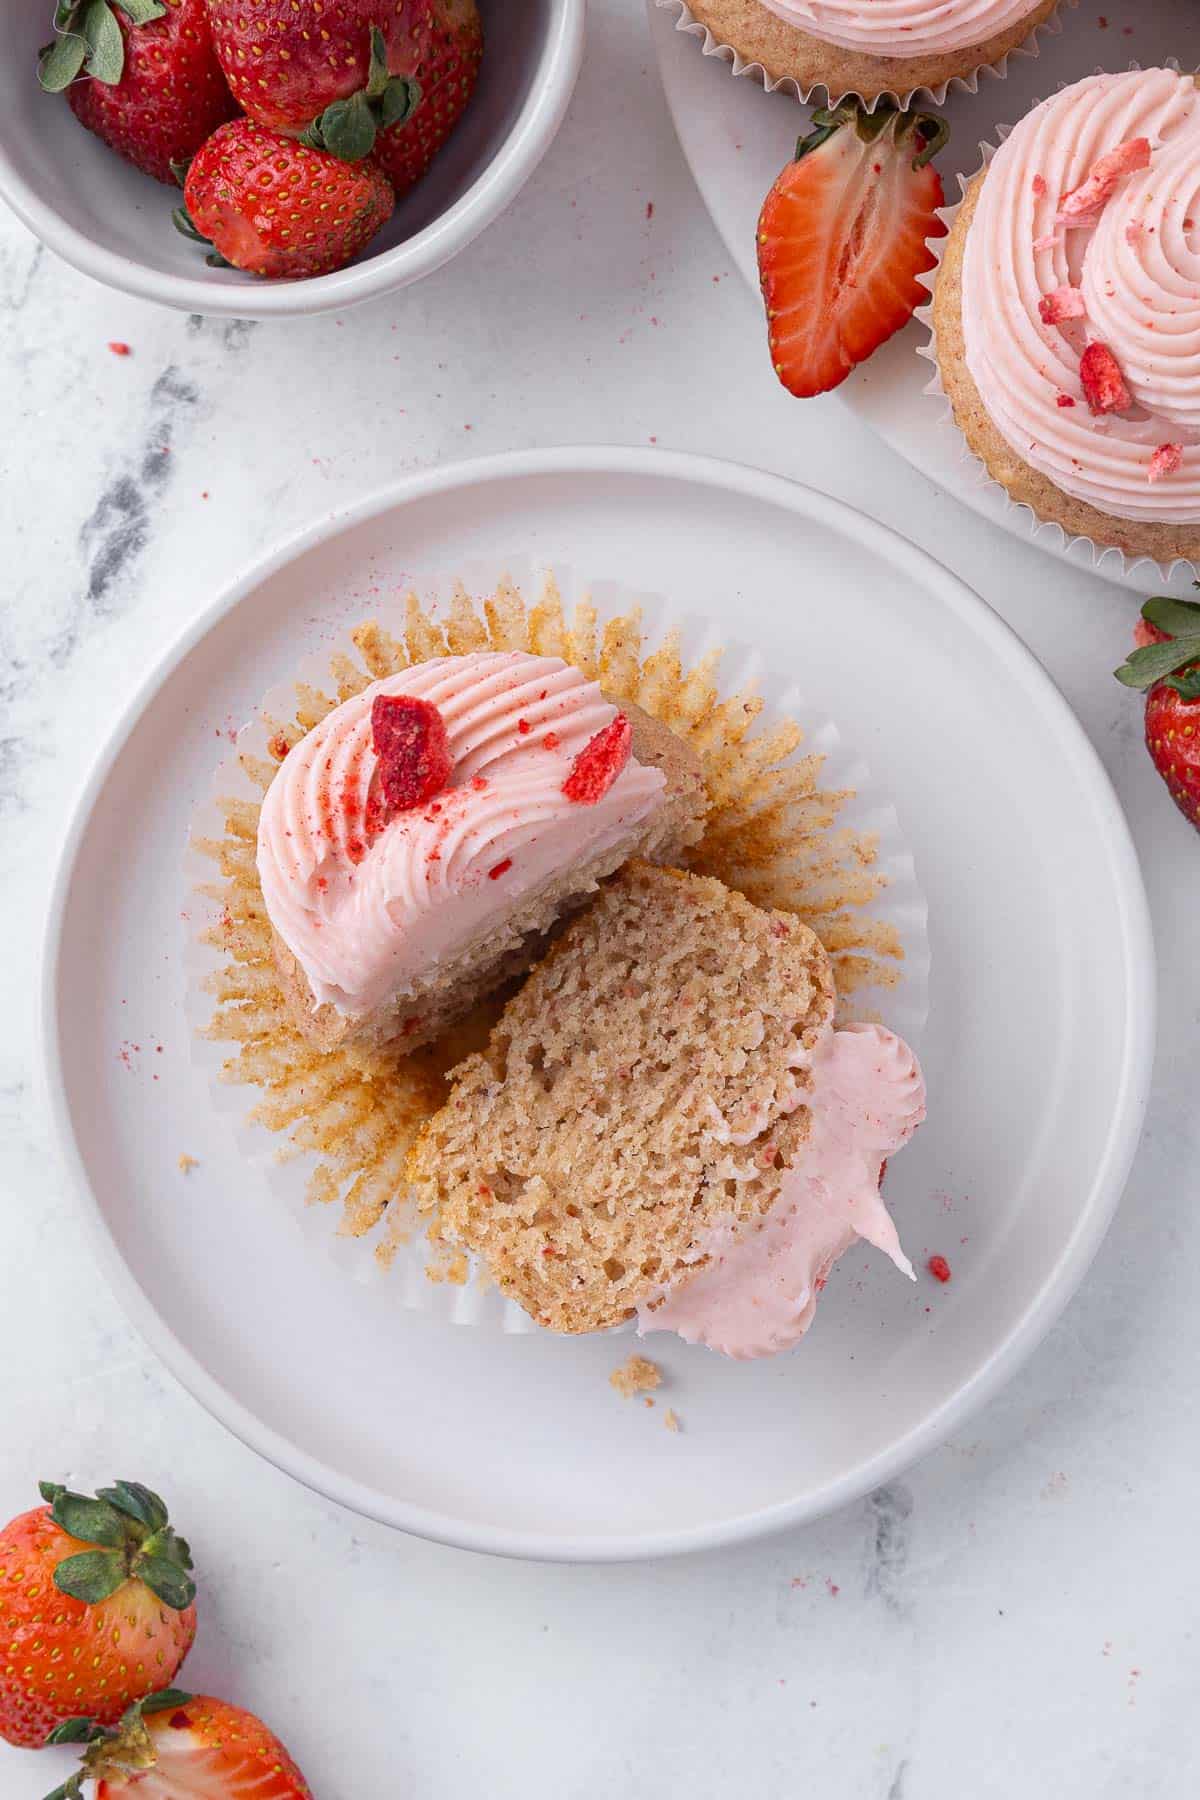 Overhead view of a strawberry cupcake cut open with one cut side facing upwards; plate of other cupcakes and bowl of fresh strawberries nearby.